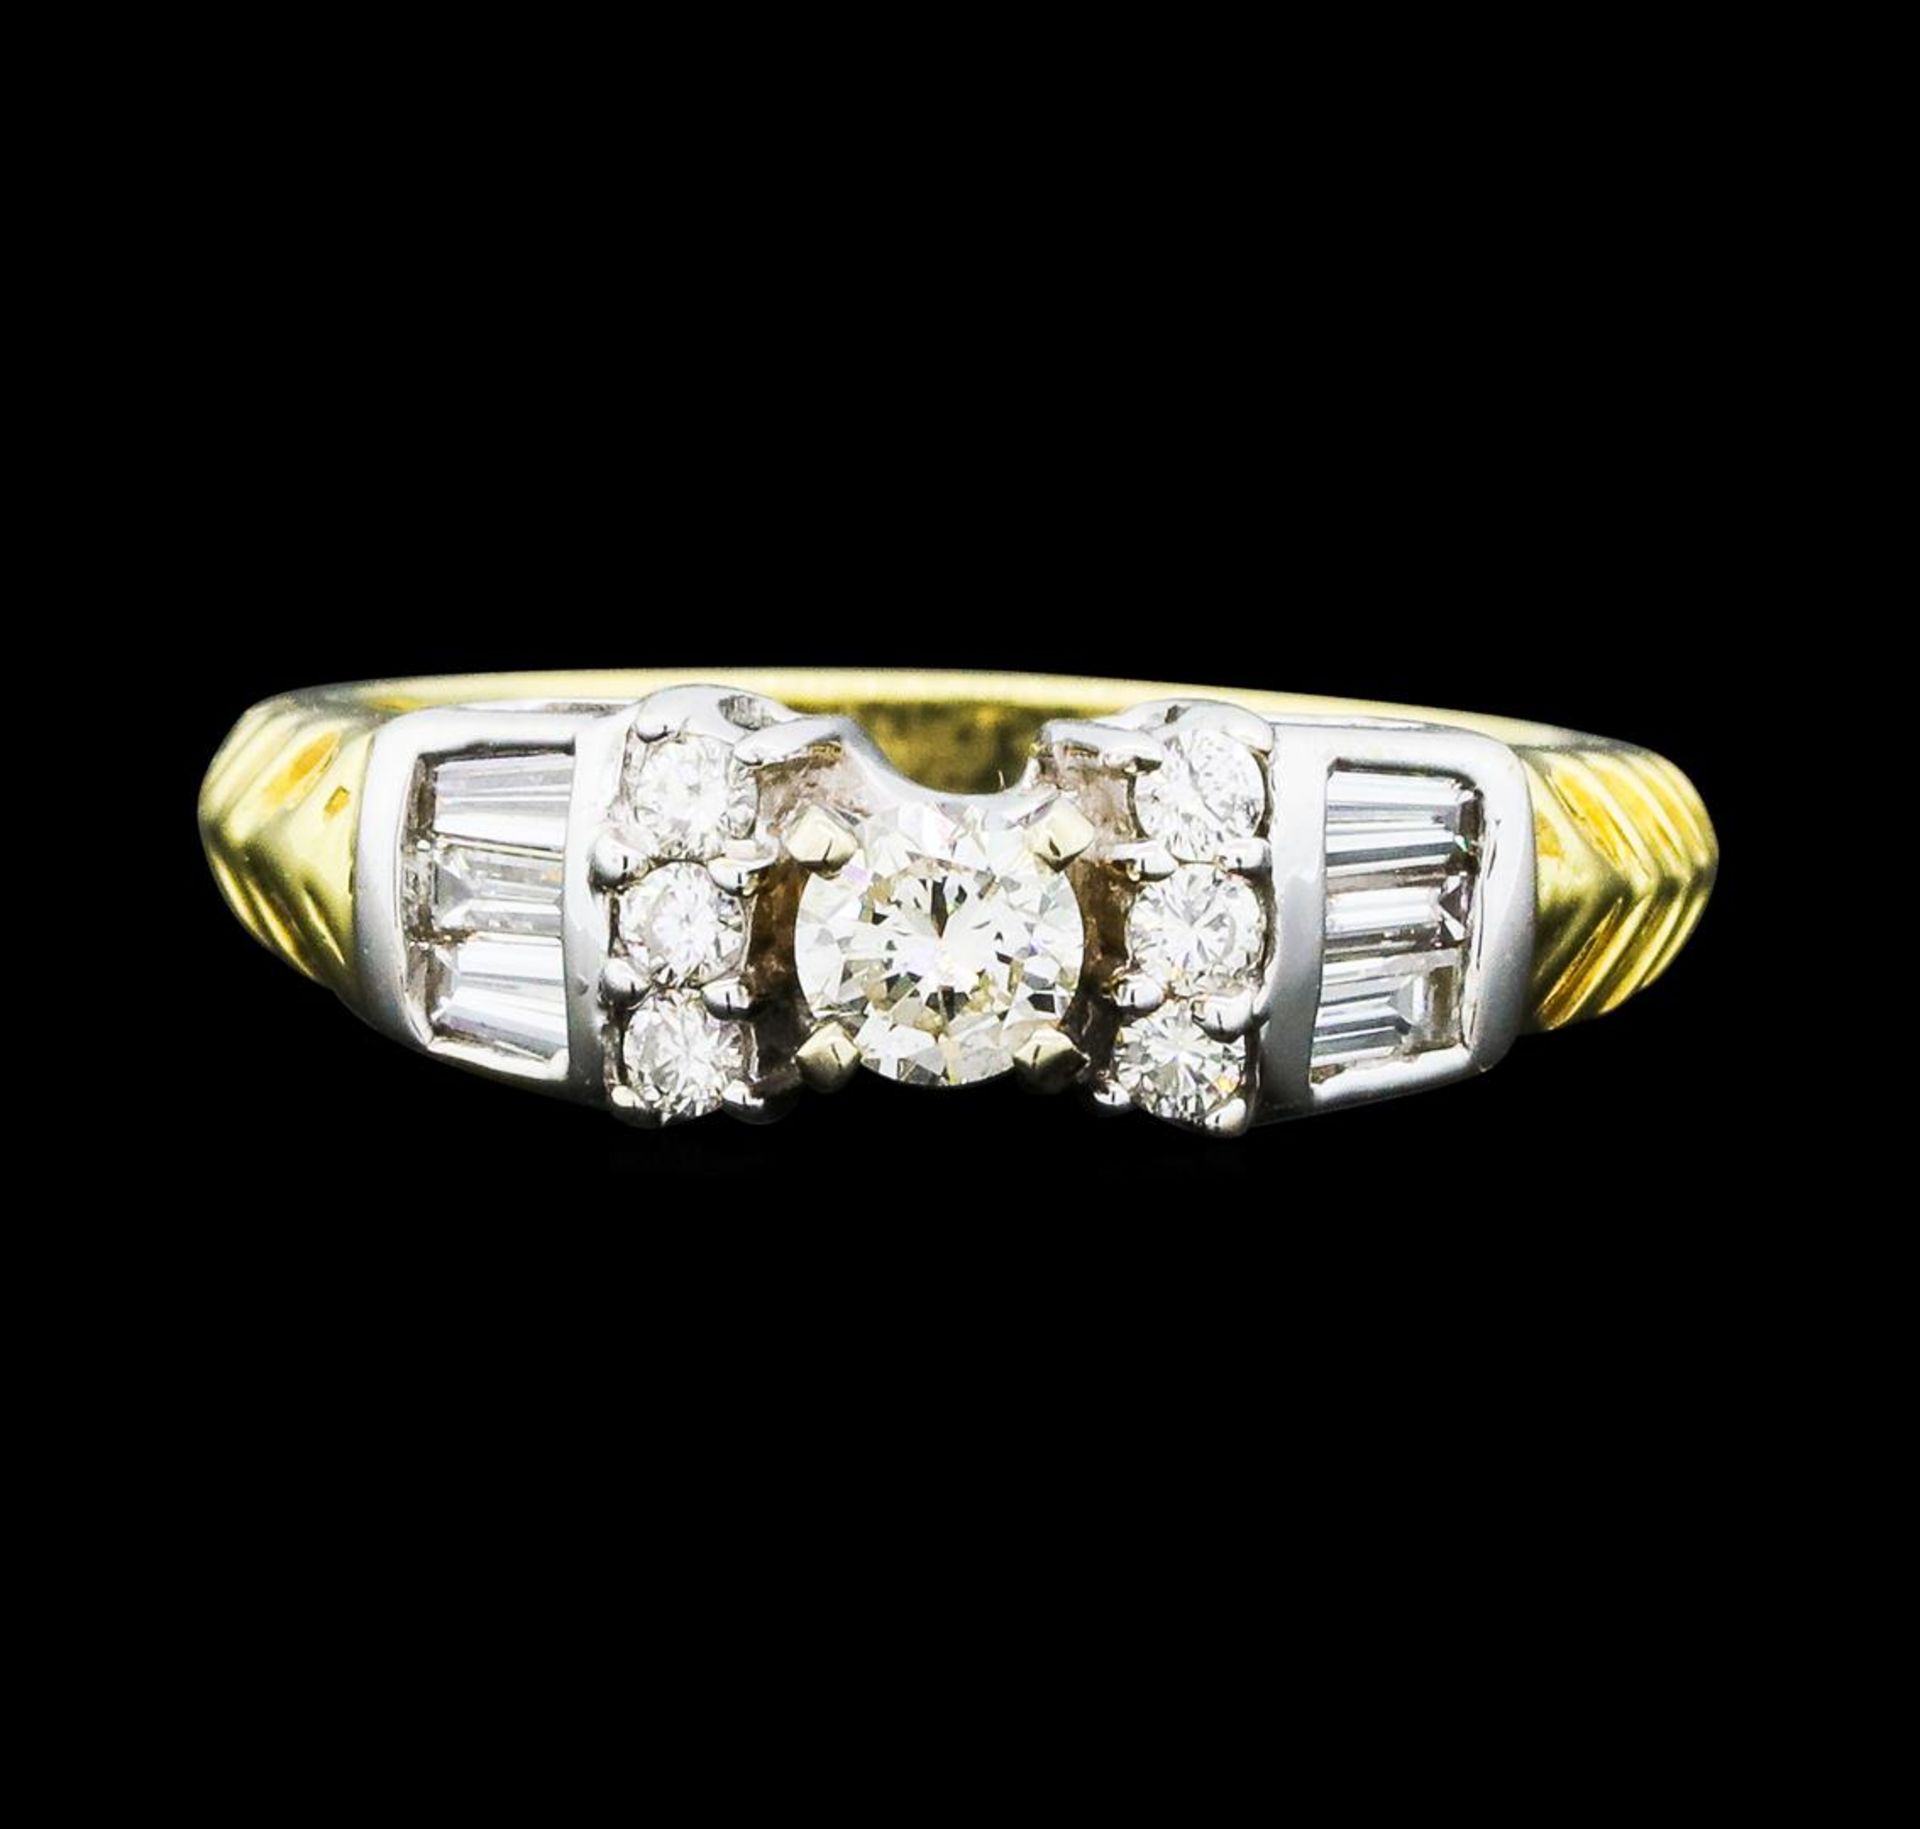 0.64 ctw Diamond Ring - 14KT Yellow And White Gold - Image 2 of 5